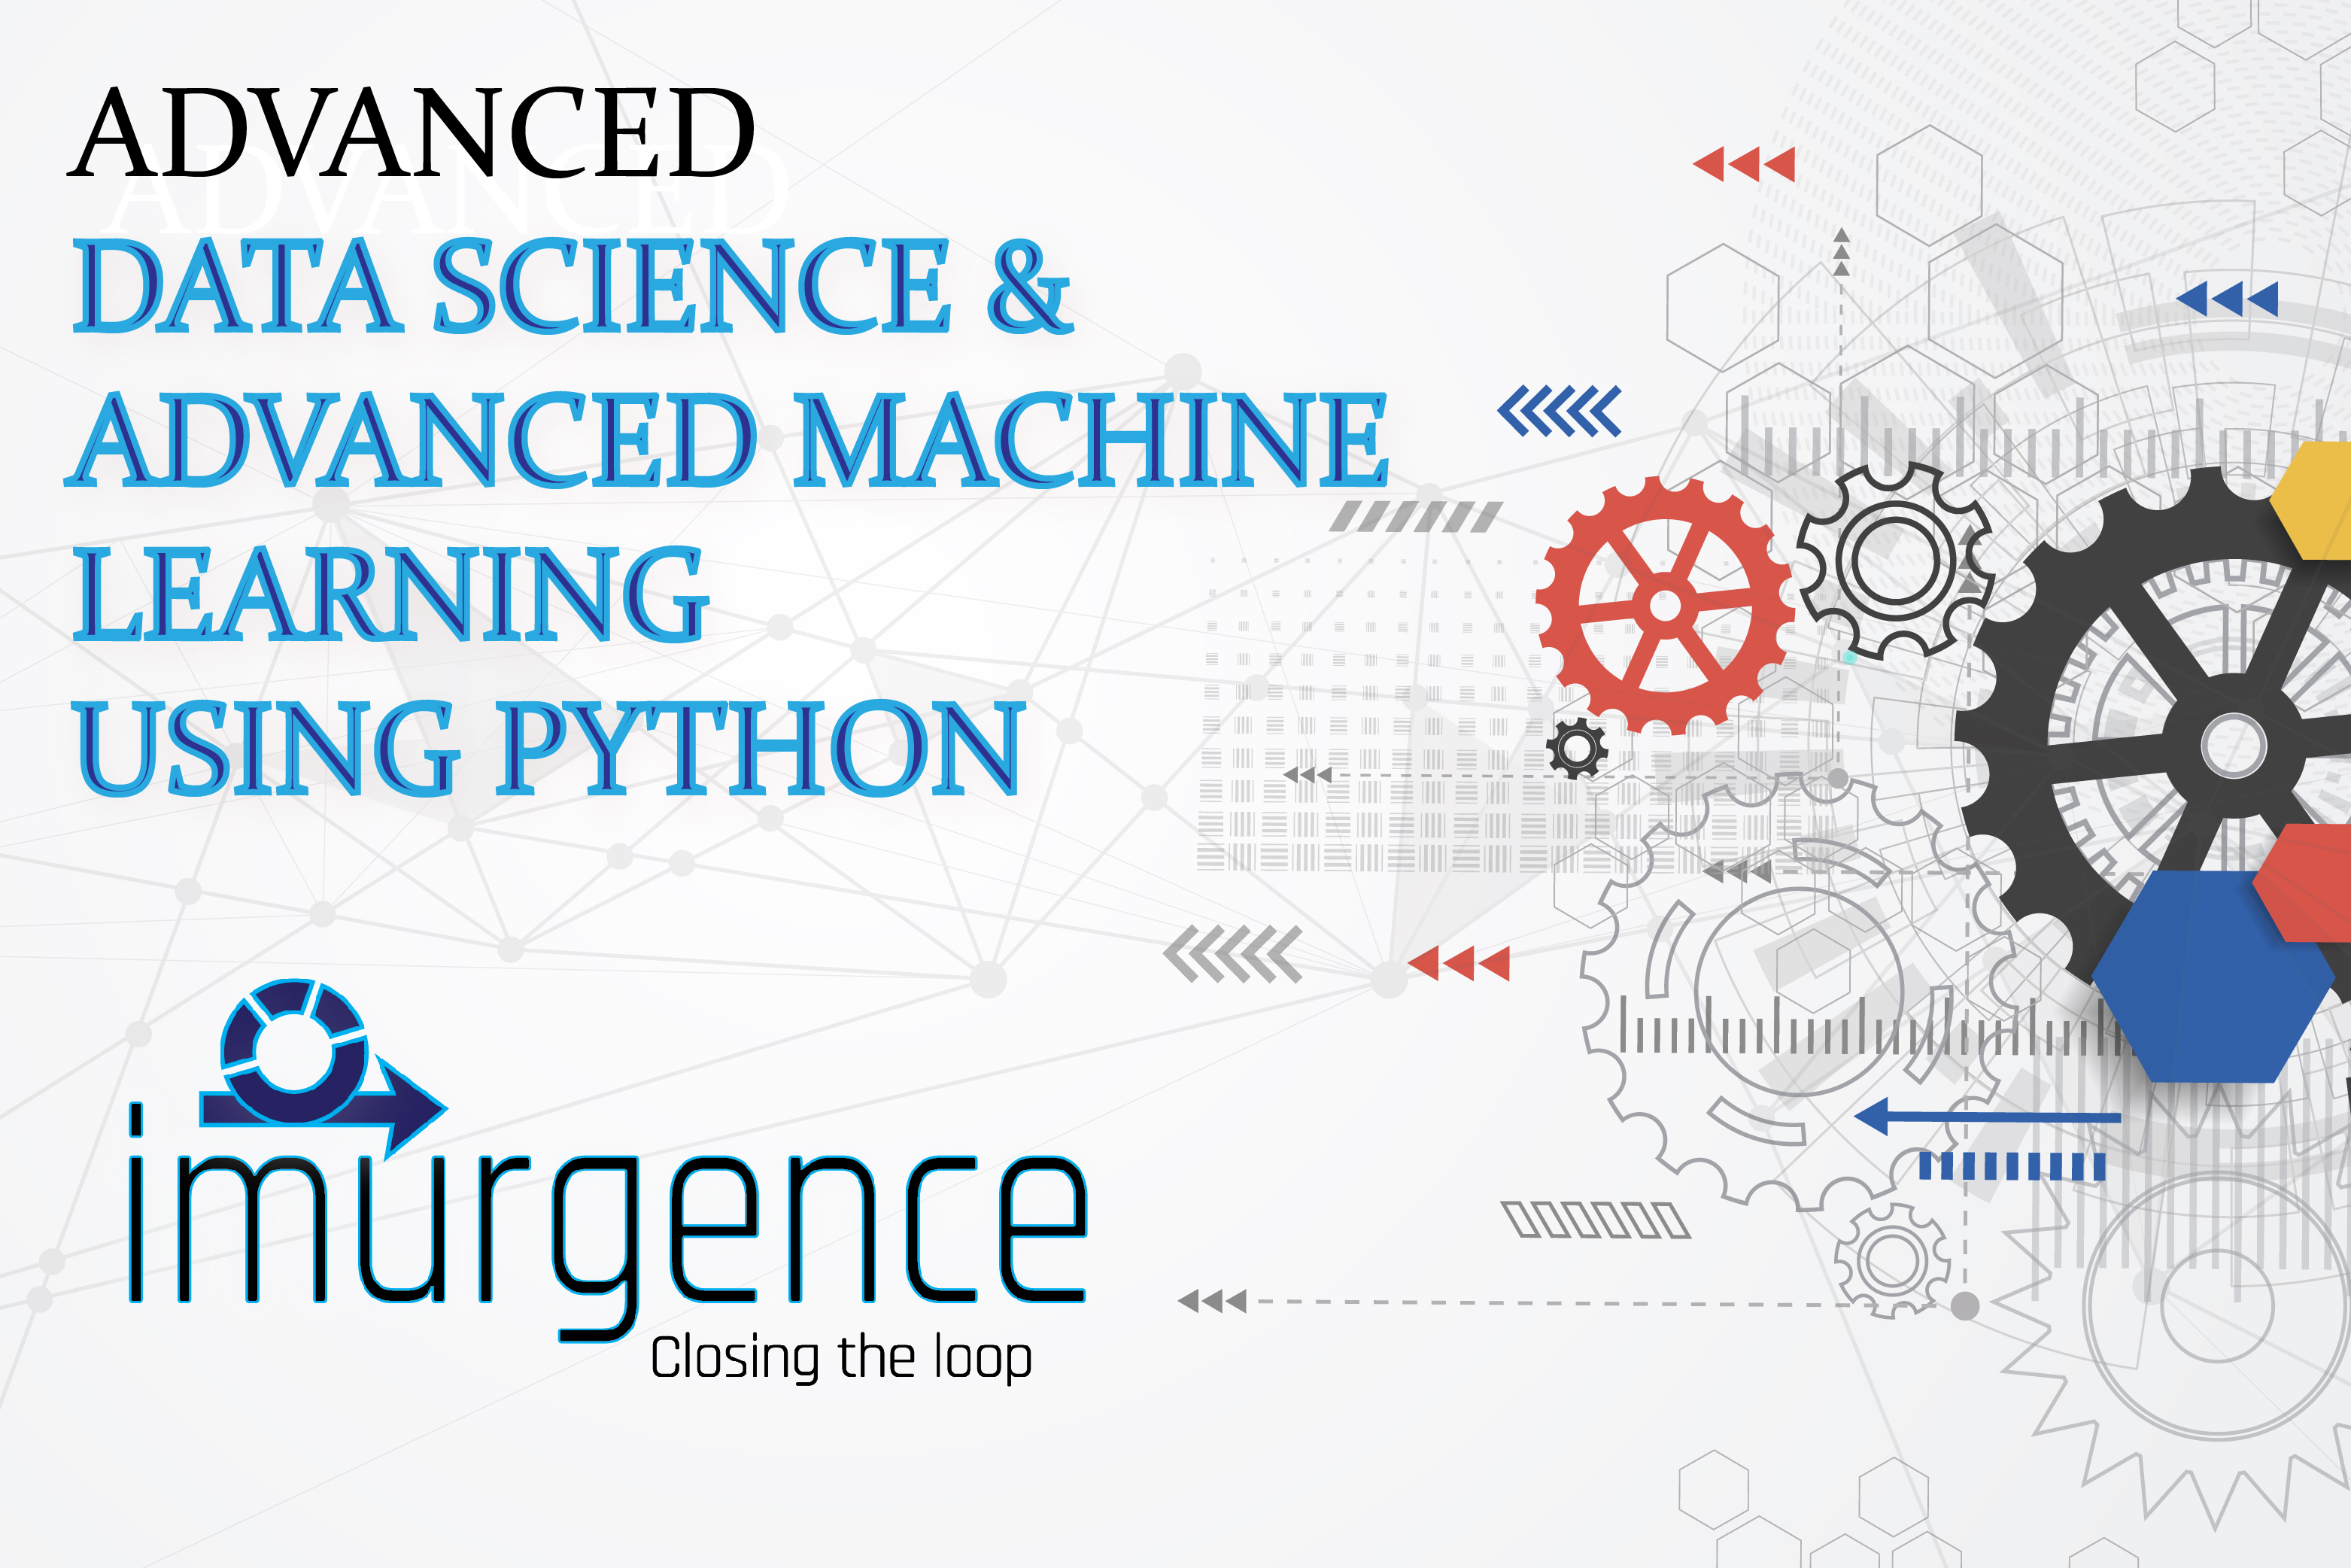 Certificate Program in Data Science & Advanced Machine Learning using Python